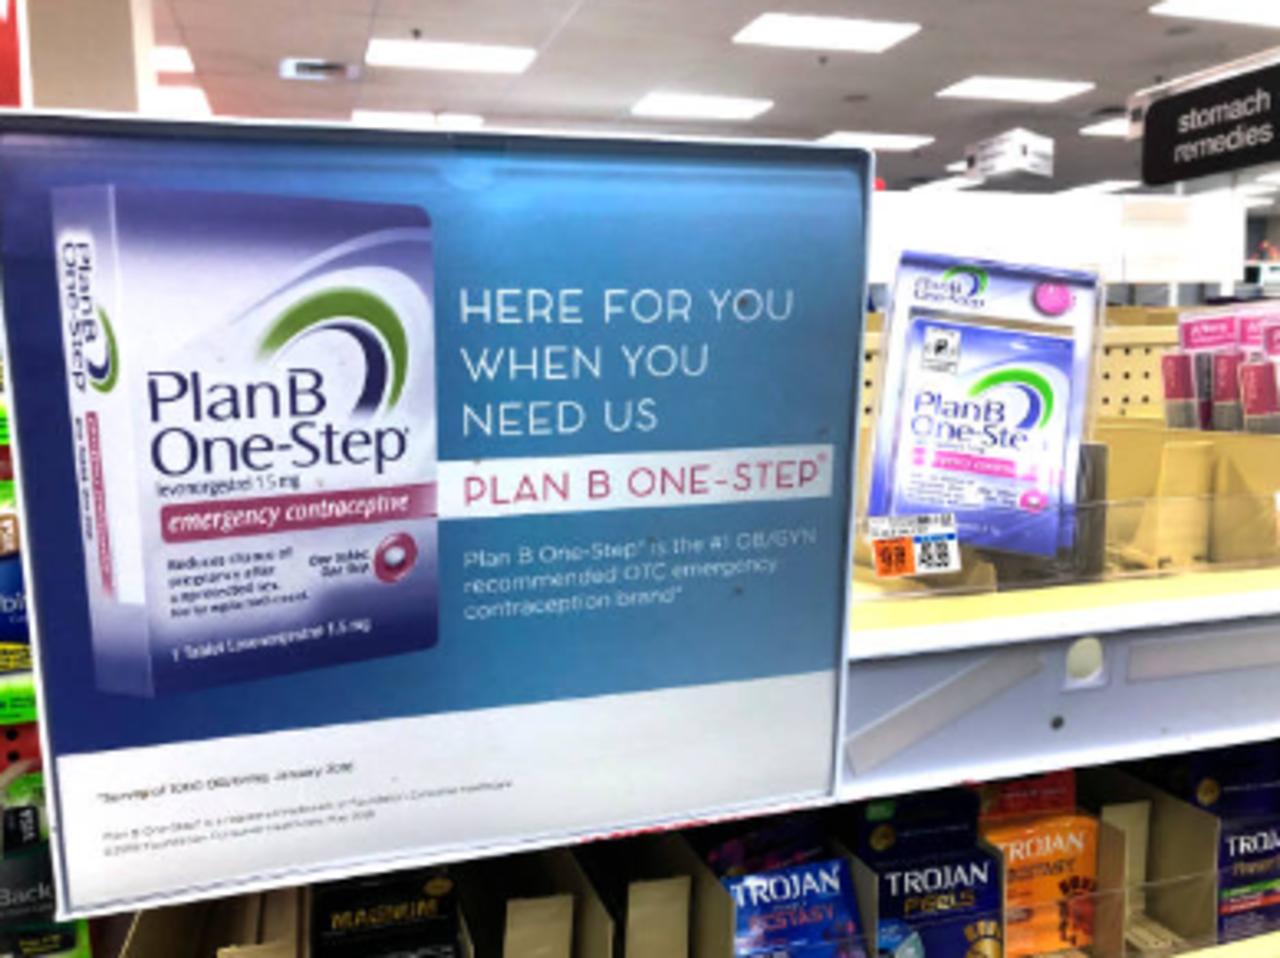 Amazon and Rite Aid Limit Emergency Contraception Purchases